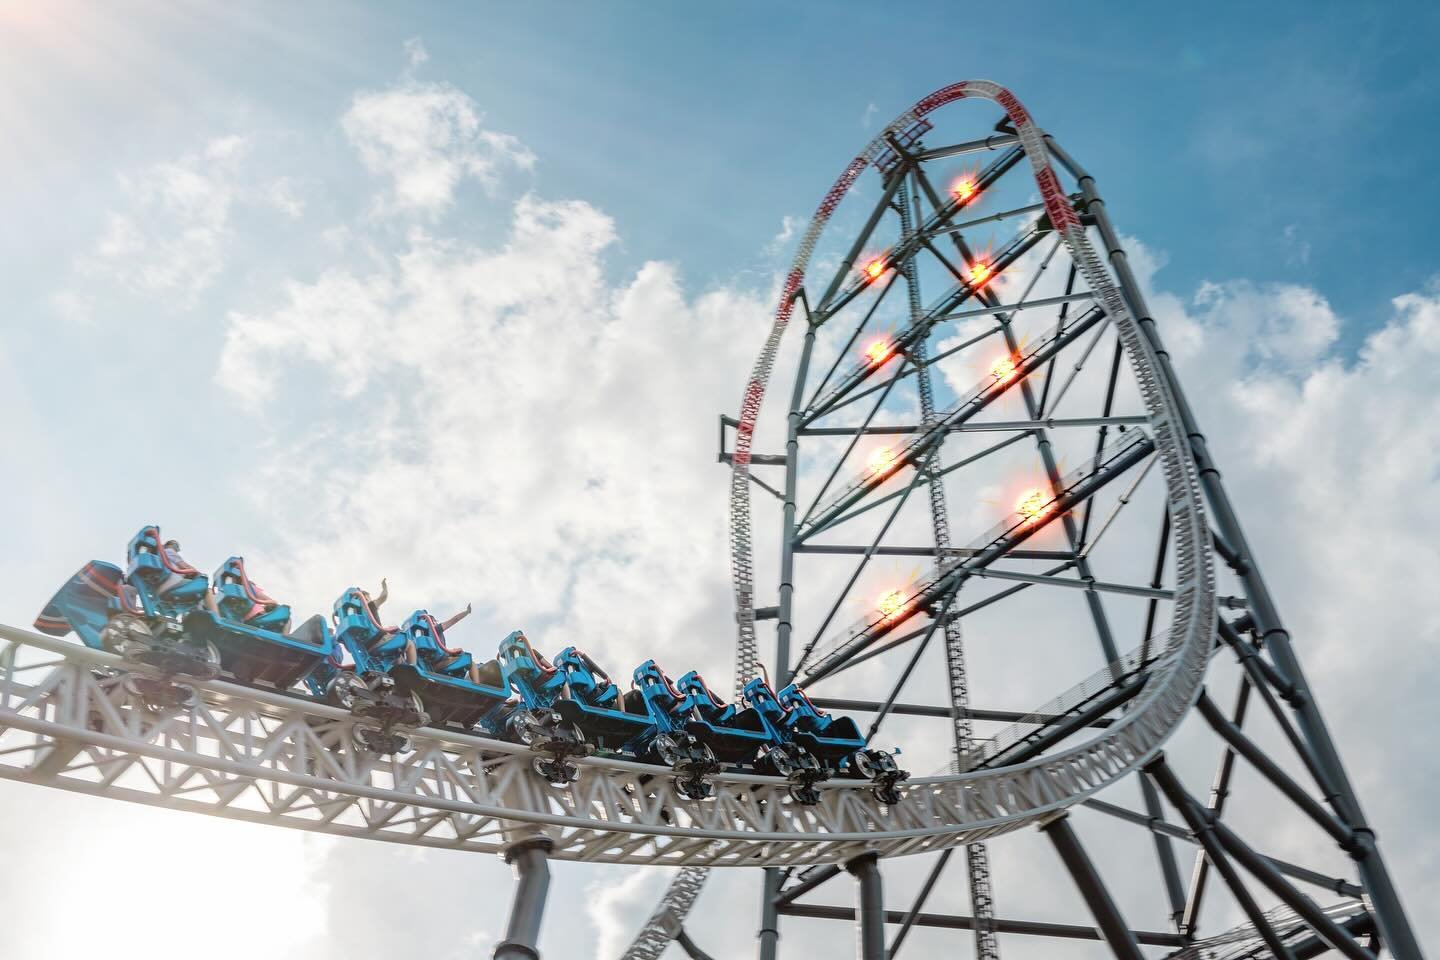 Happy Top Thrill Tuesday!! From start to finish this ride never lets up! Do you prefer the original Dragster or Top Thrill 2?
.
🎢 Top Thrill 2 - Cedar Point (@cedarpoint)
.
.
⚙️ Antonio Zamperla spA (@zamperlacoasters) 
.
.
📸: @cedarpoint 
📱: Use 